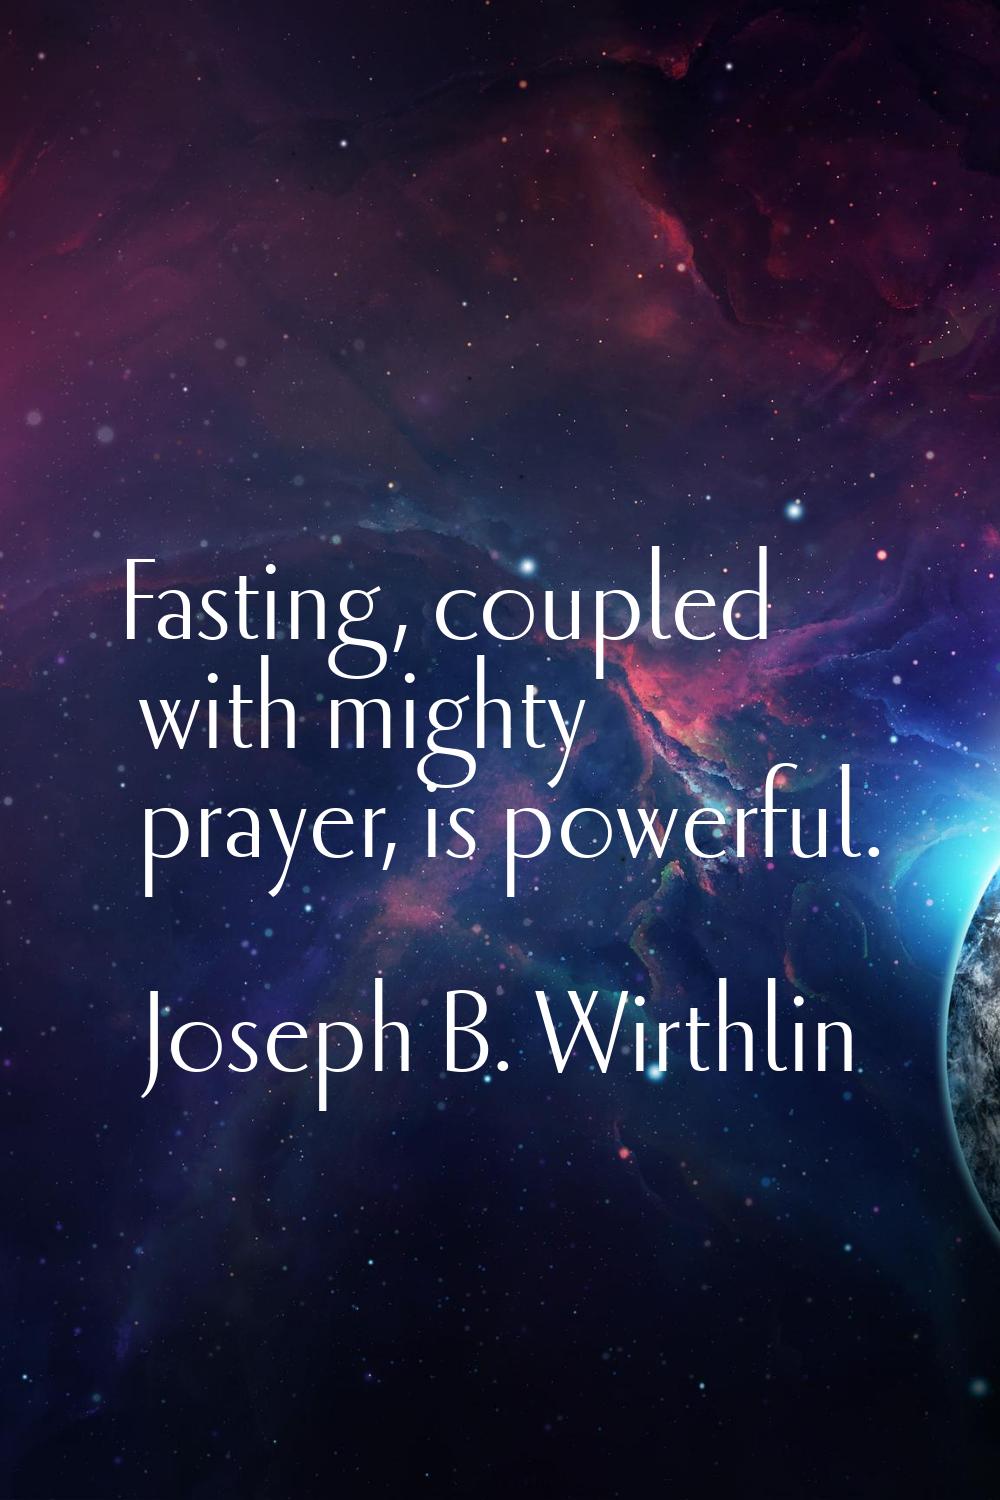 Fasting, coupled with mighty prayer, is powerful.